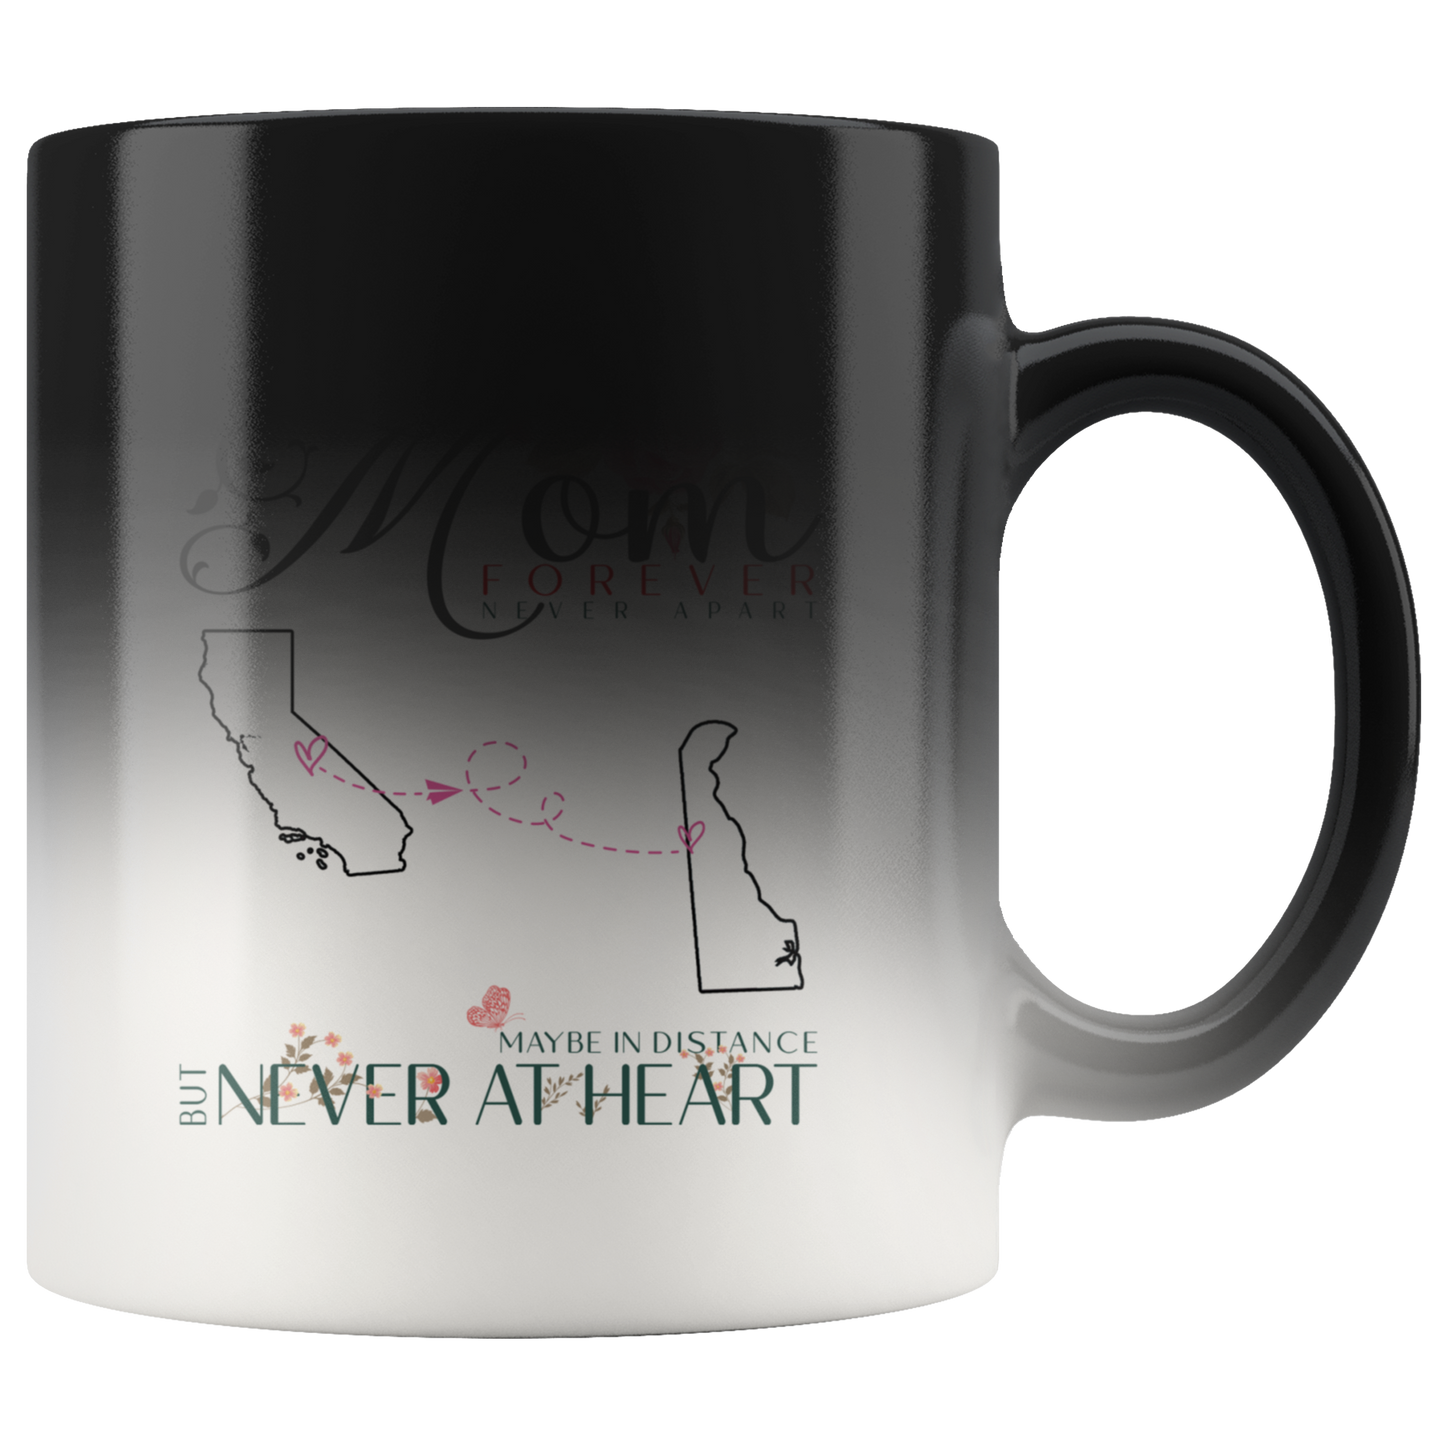 M-20321571-sp-23624 - [ California | Delaware ]Personalized Mothers Day Coffee Mug - My Mom Forever Never A